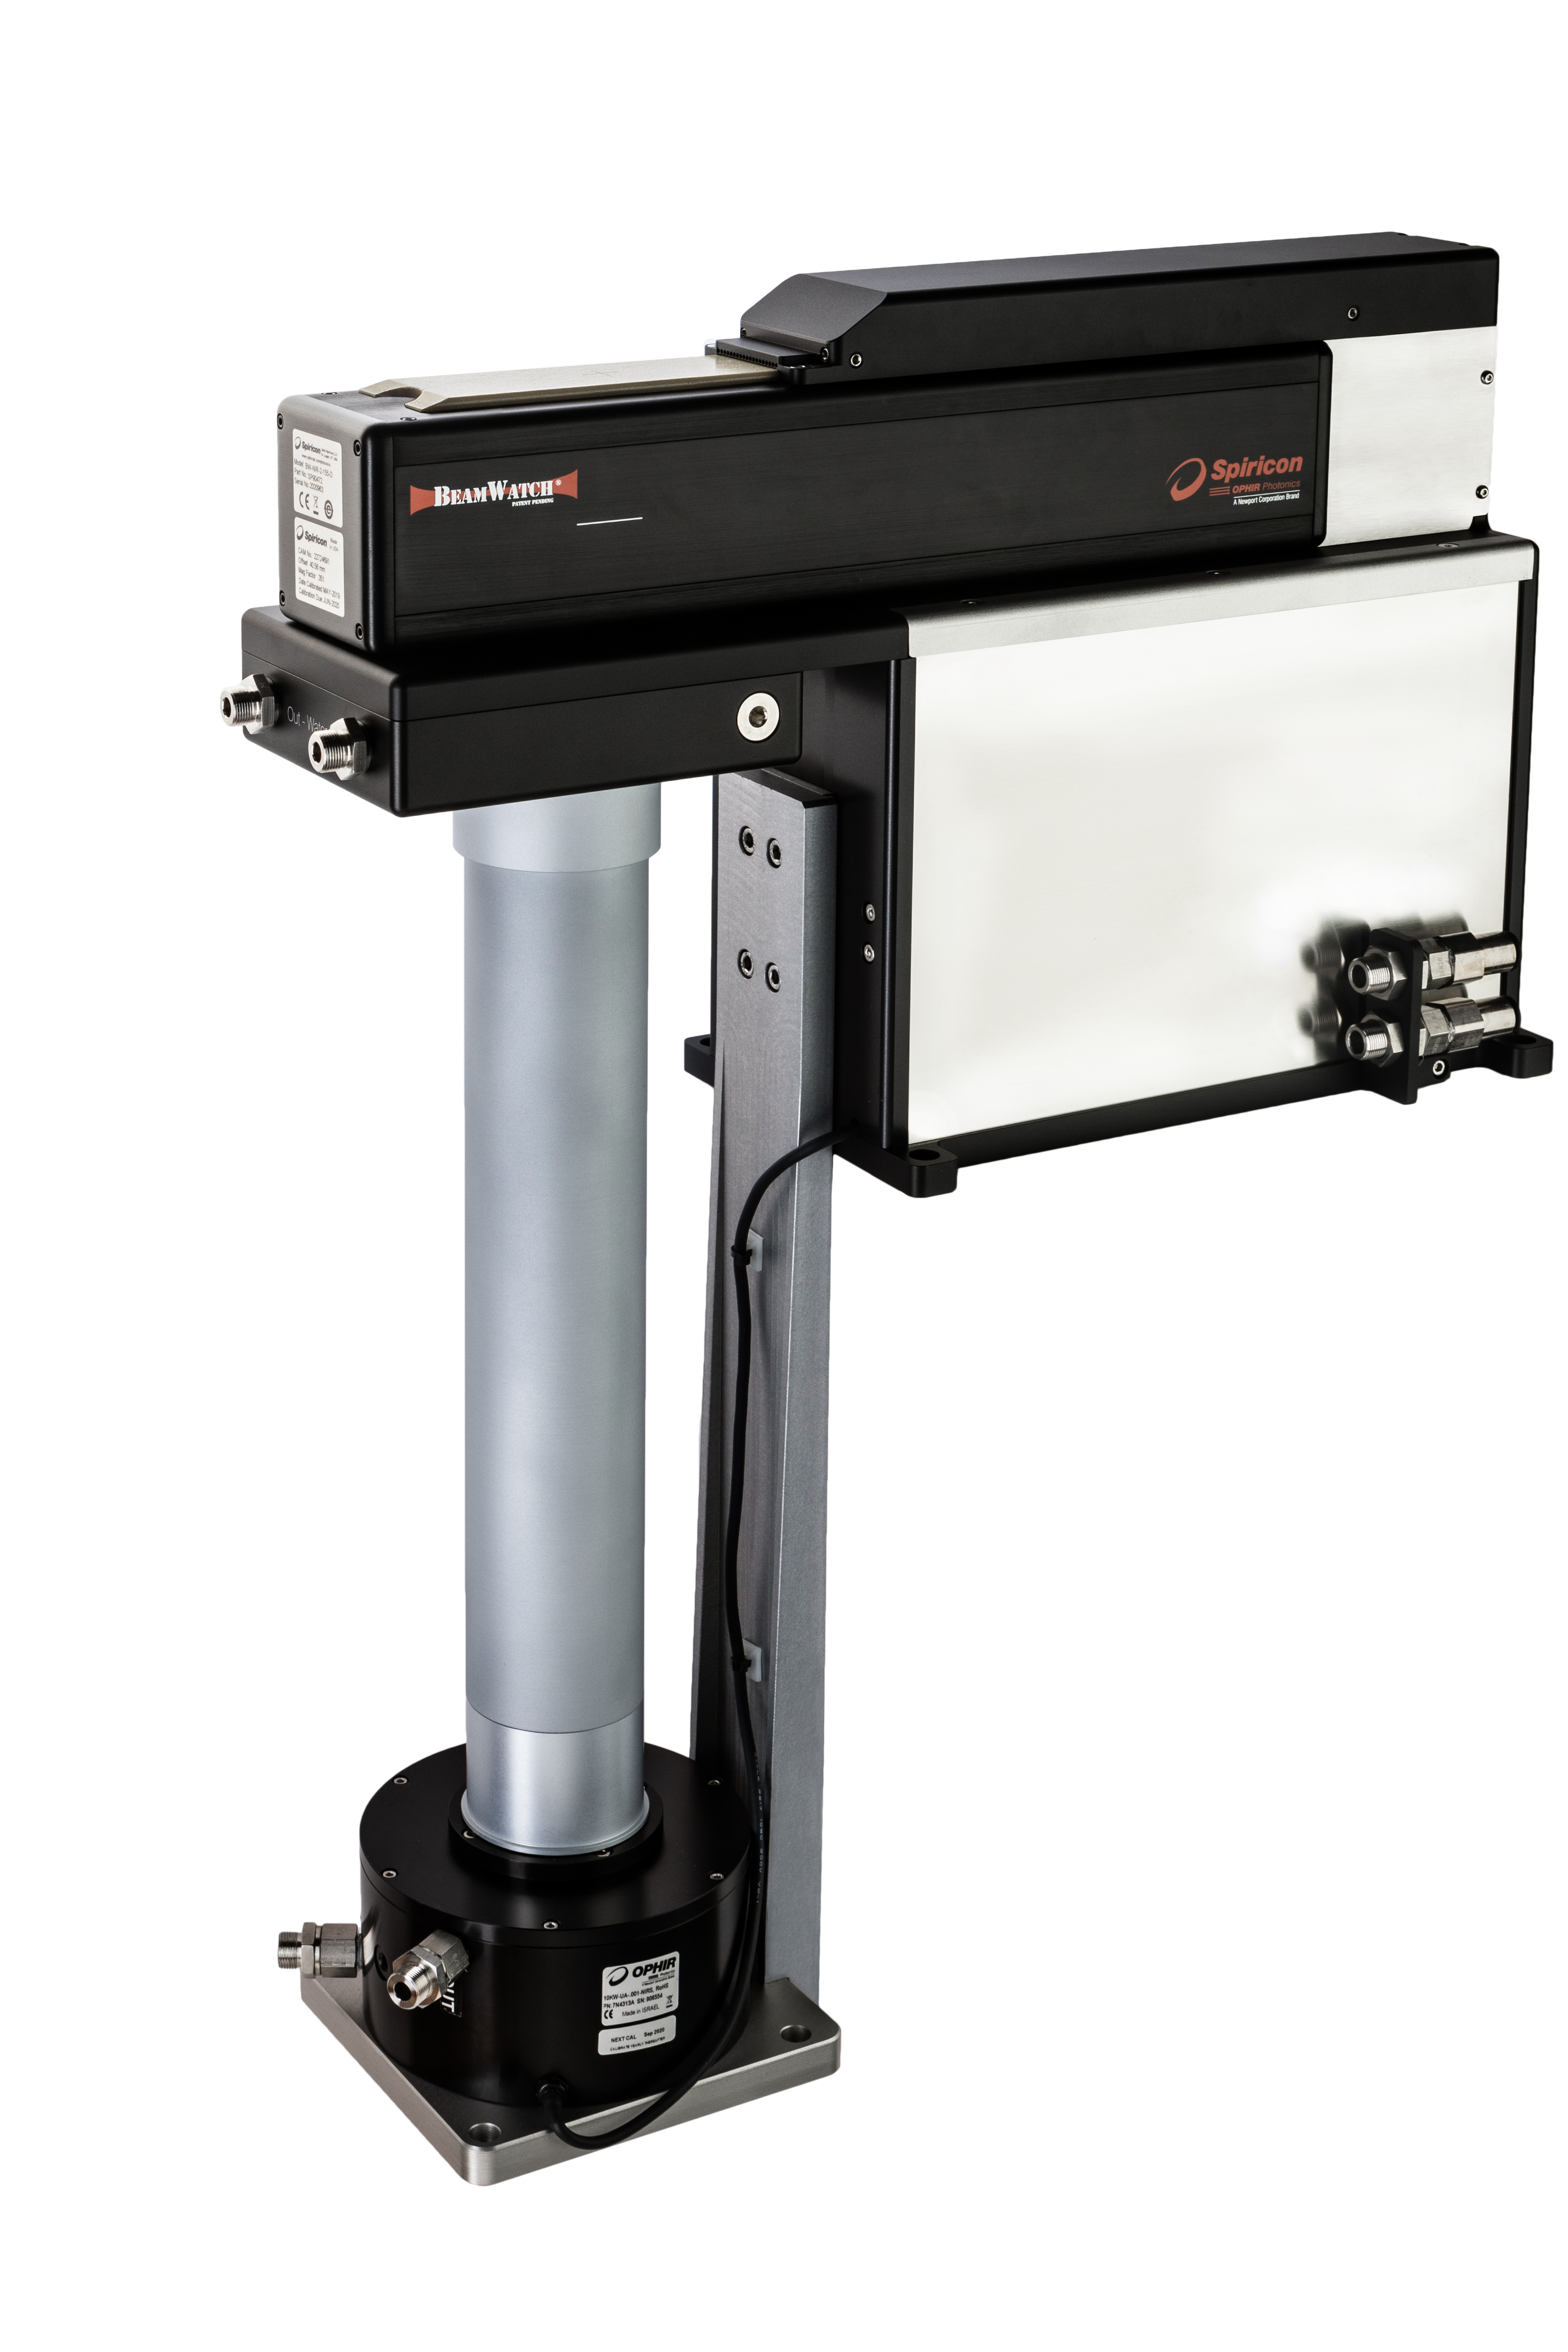 Ophir® BeamWatch® Integrated 500 Industrial Beam Characterization System Measures Critical Laser Parameters in Production Processes